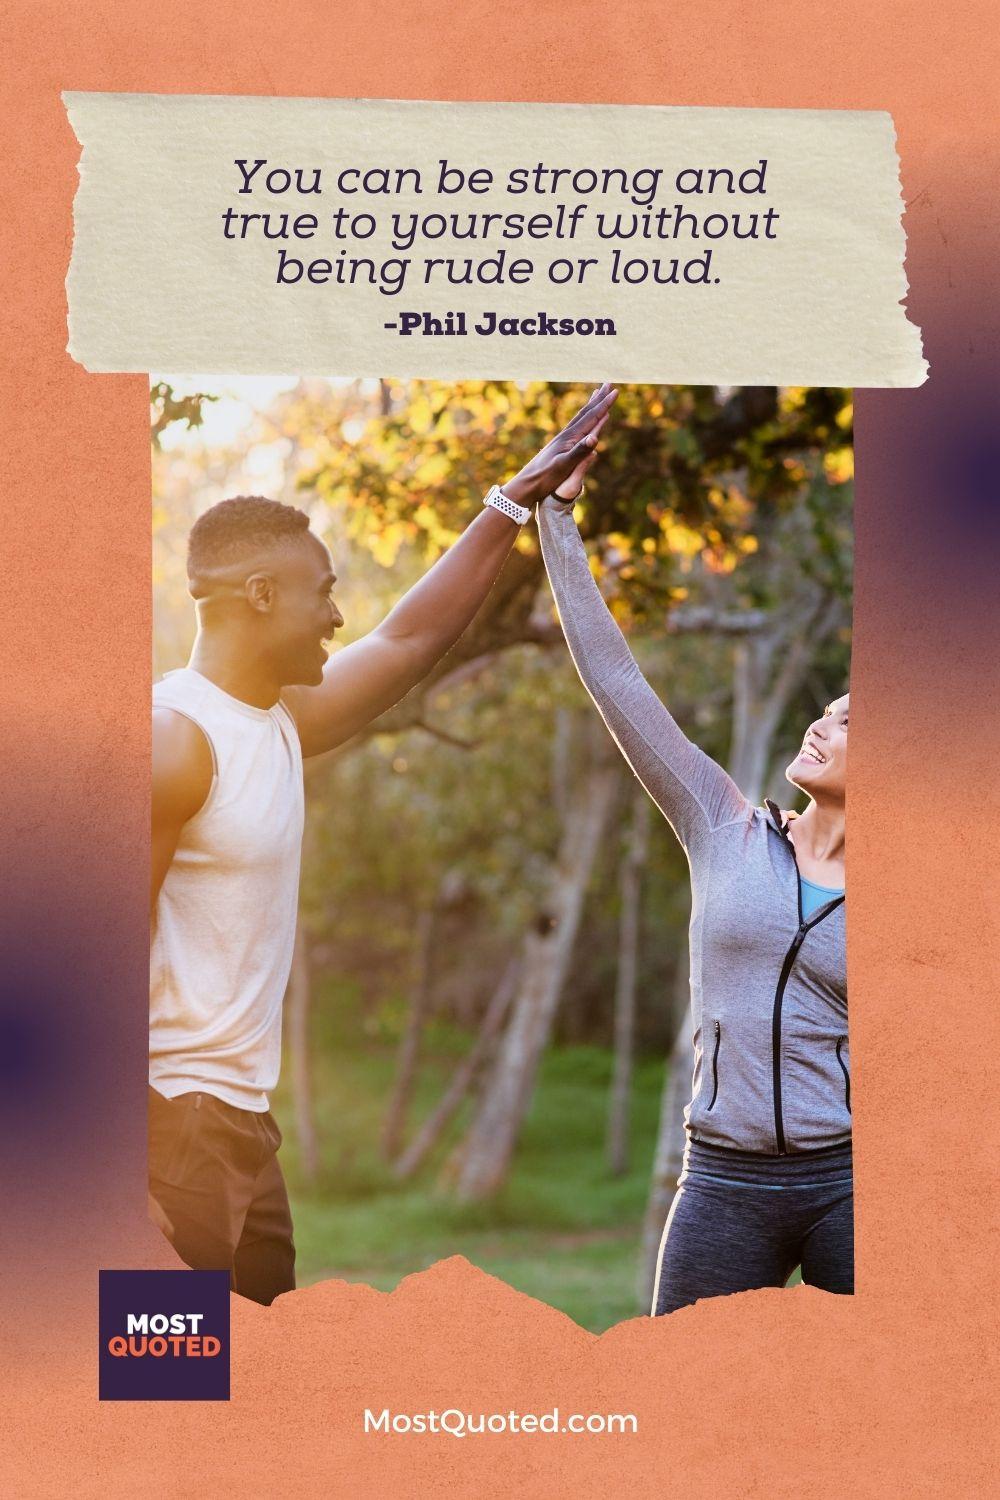 You can be strong and true to yourself without being rude or loud. - Paula Radcliffe